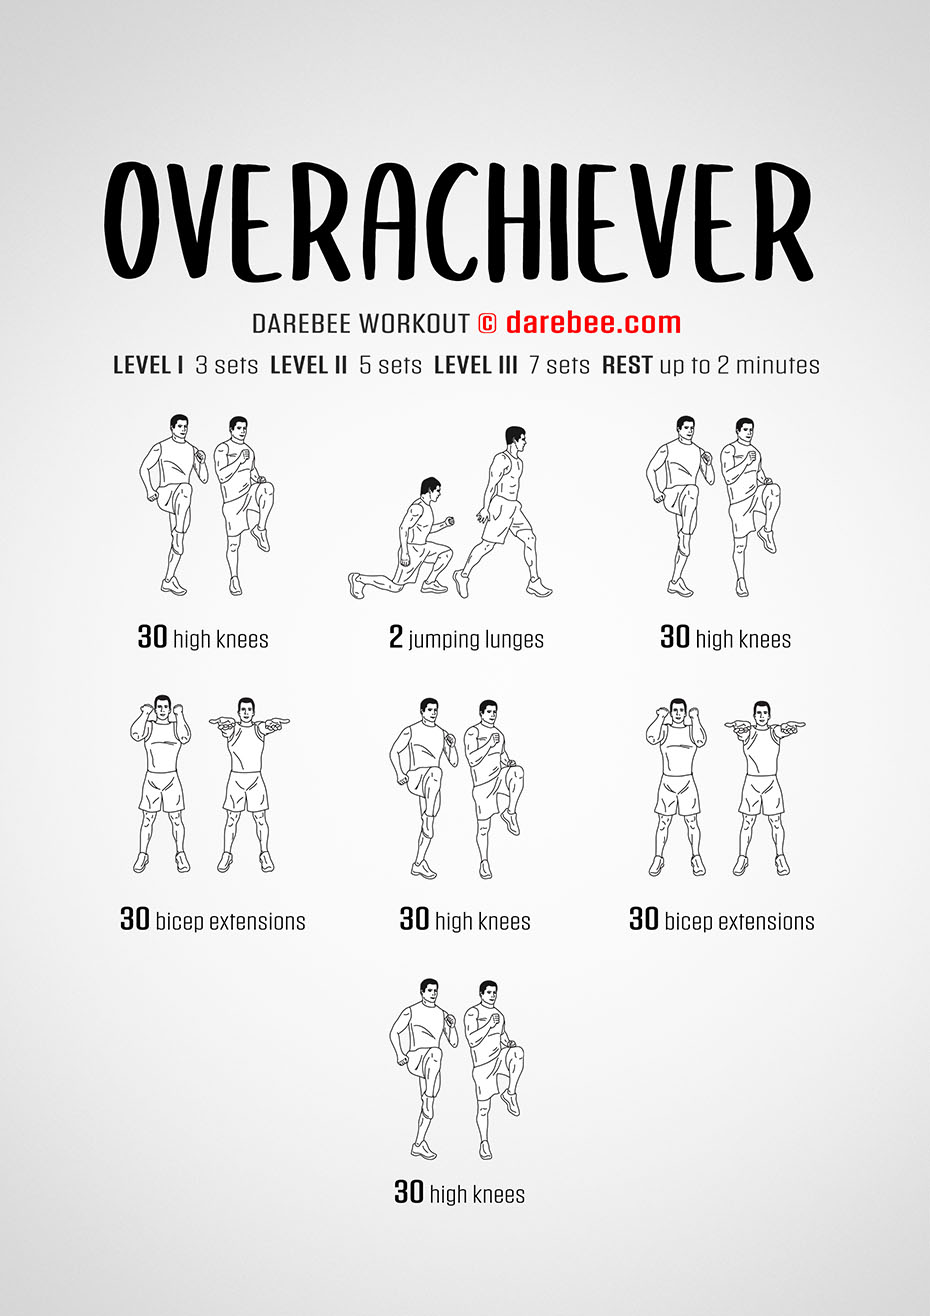 Overachiever Workout